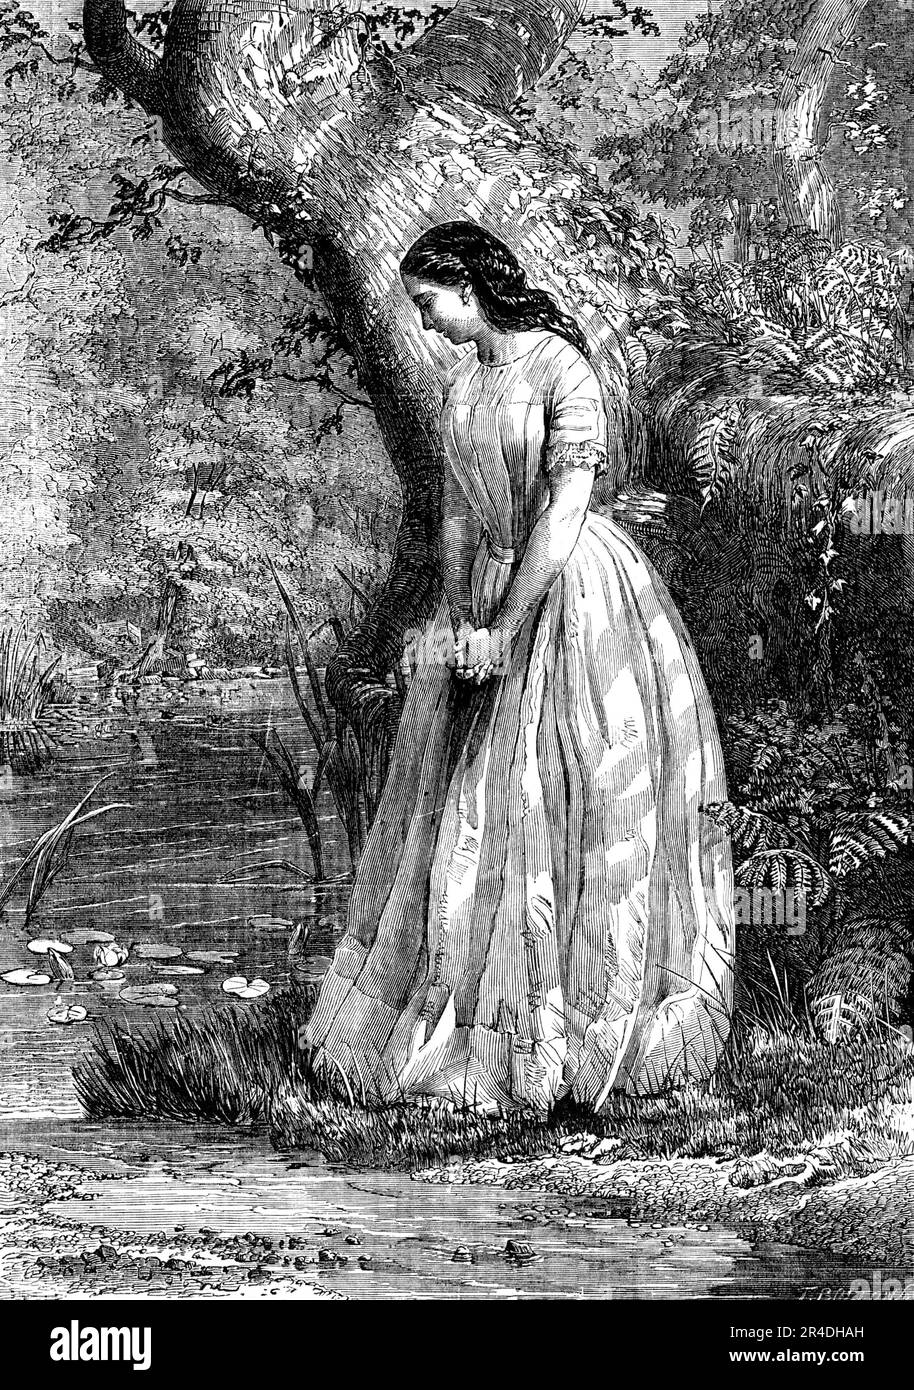 &quot;Maidenhood&quot; - painted by G. E. Hicks - from the Exhibition of the Royal Academy, 1856. Engraving of a painting. '&quot;Standing with reluctant feet, Where the brook and river meet, Womanhood and childhood fleet. Gazing with a timid glance On the brooklet's swift advance, On the river's broad expanse. Deep and still, that gliding stream Beautiful to thee must seem, As the river of a dream&quot;. So sings Mr. Longfellow, and so Mr. Hicks has not unsuccessfully sought to embody'. From &quot;Illustrated London News&quot;, 1856. Stock Photo